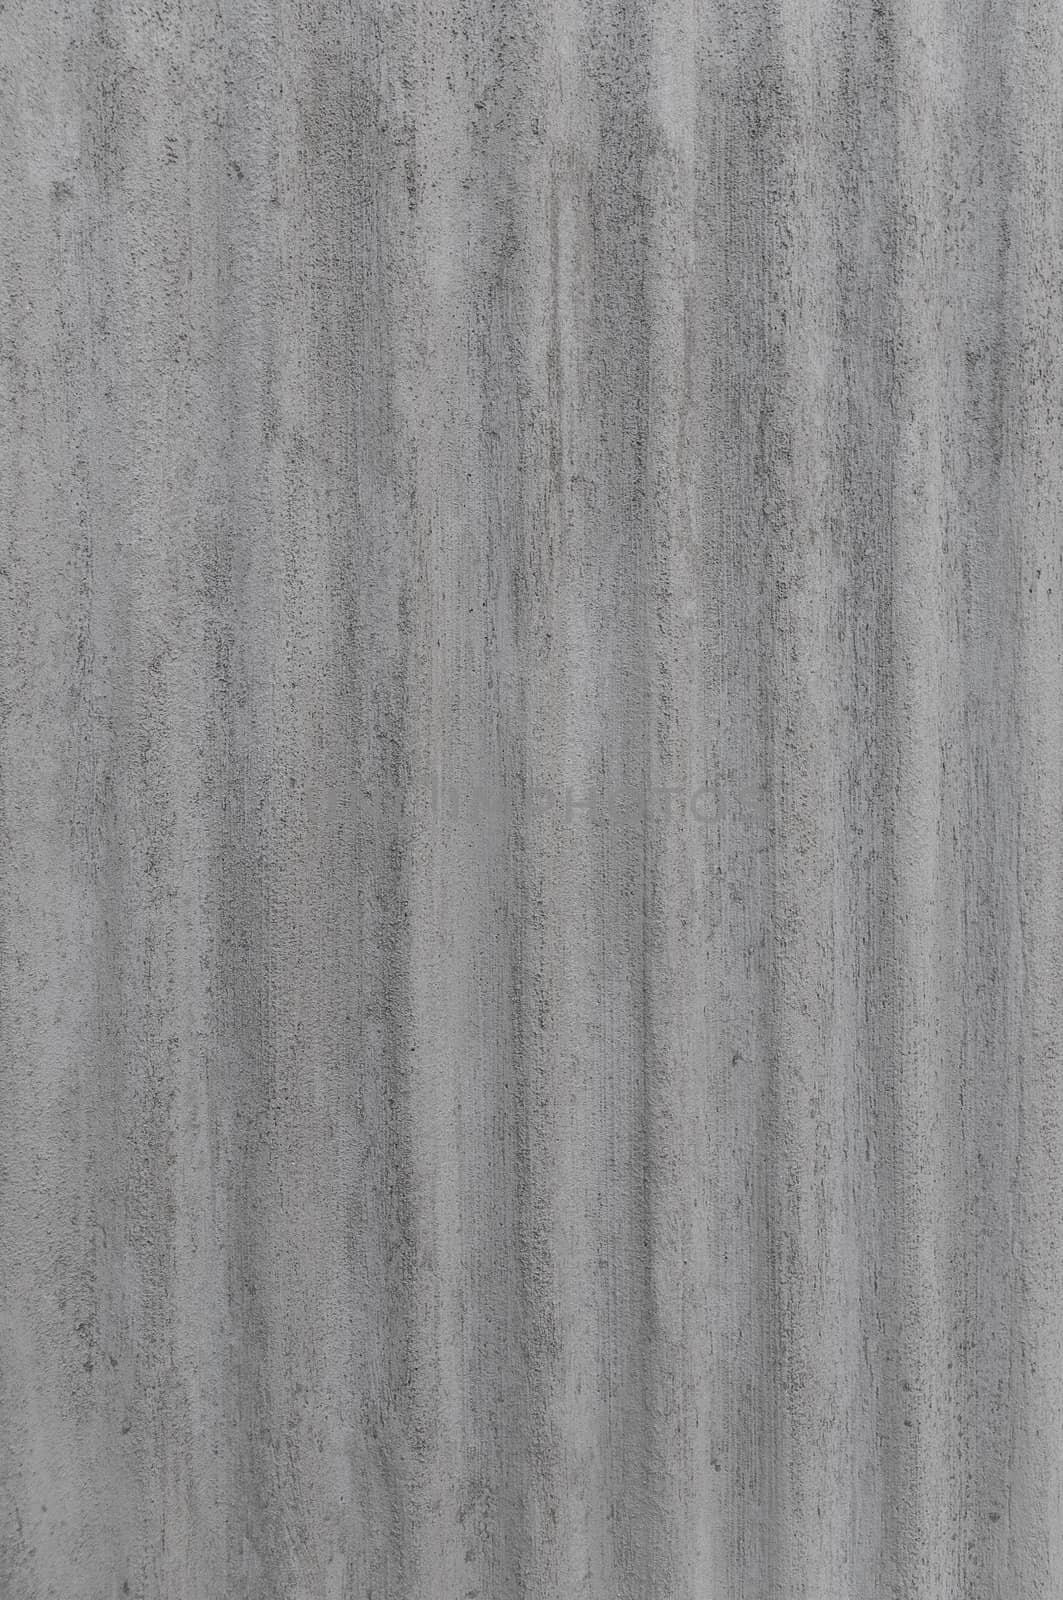 Rough gray corrugated steel backdrop by Shane9